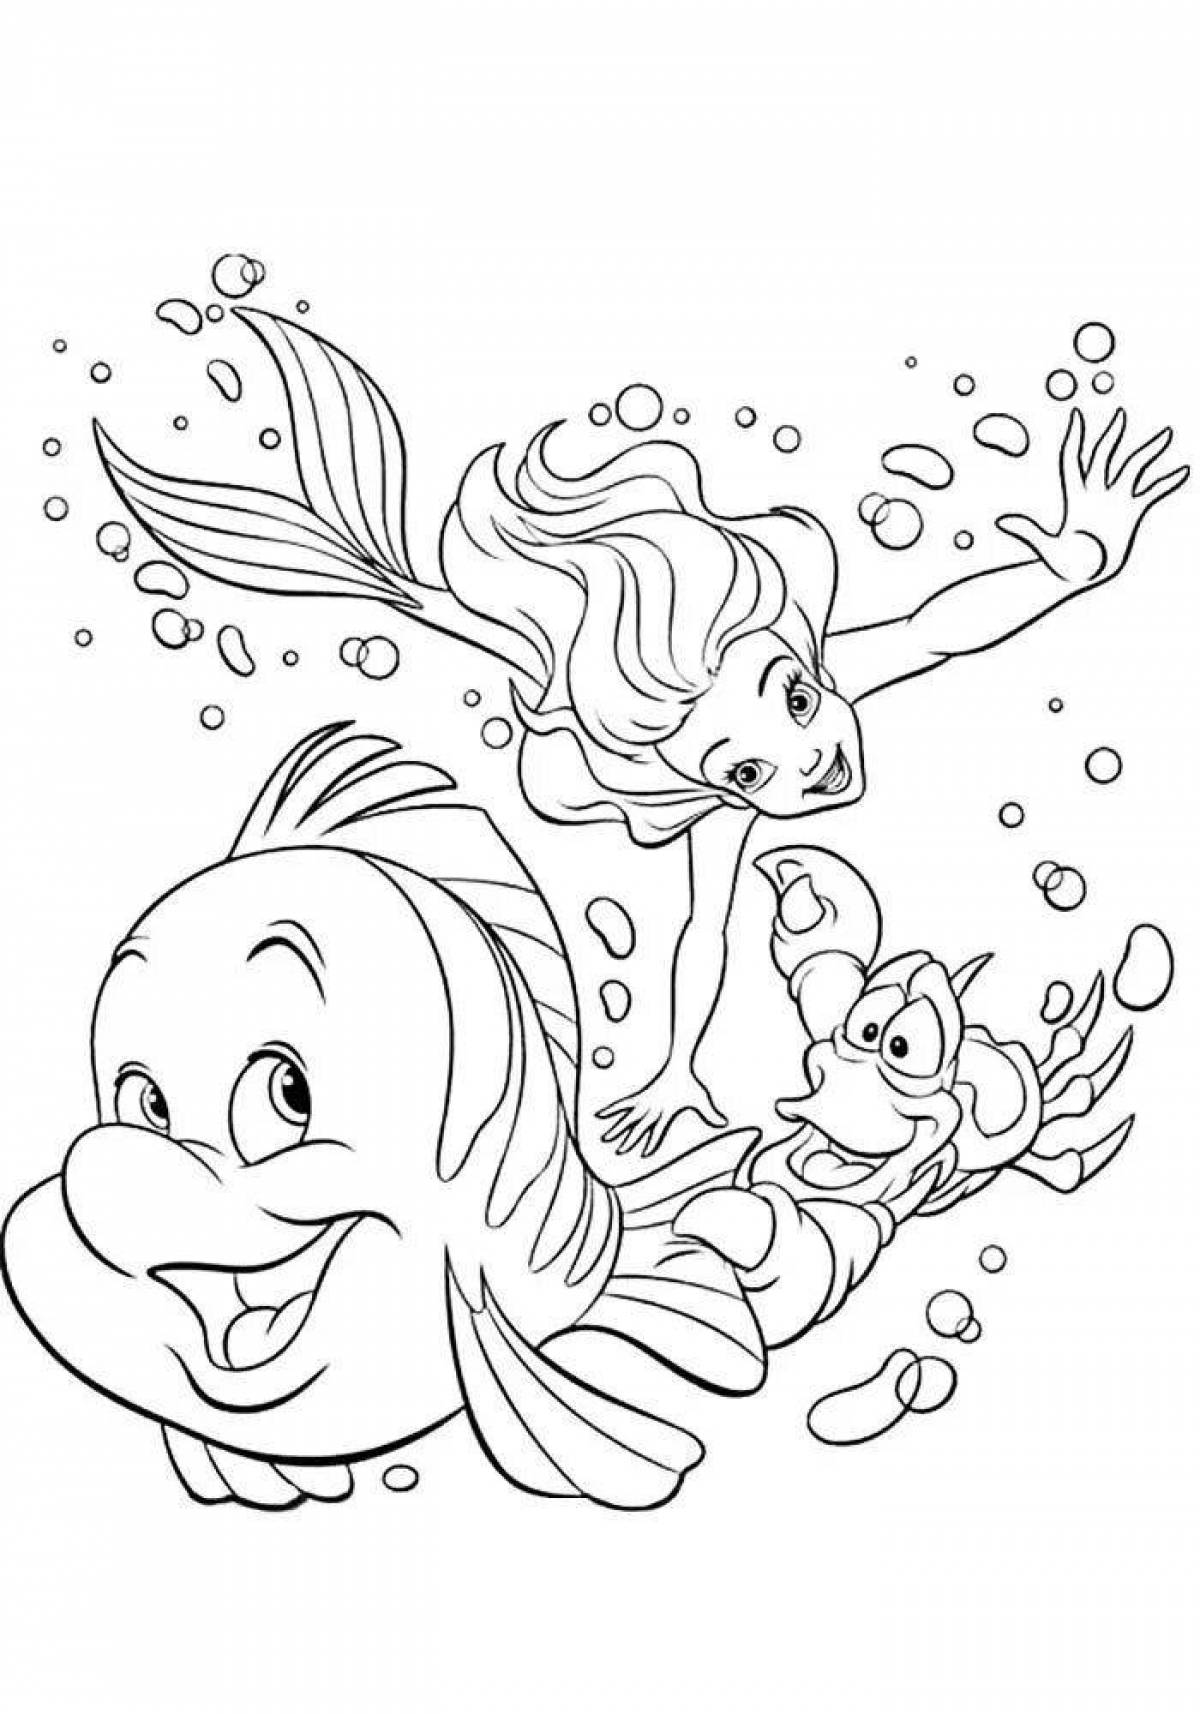 Magic coloring for girls little mermaid